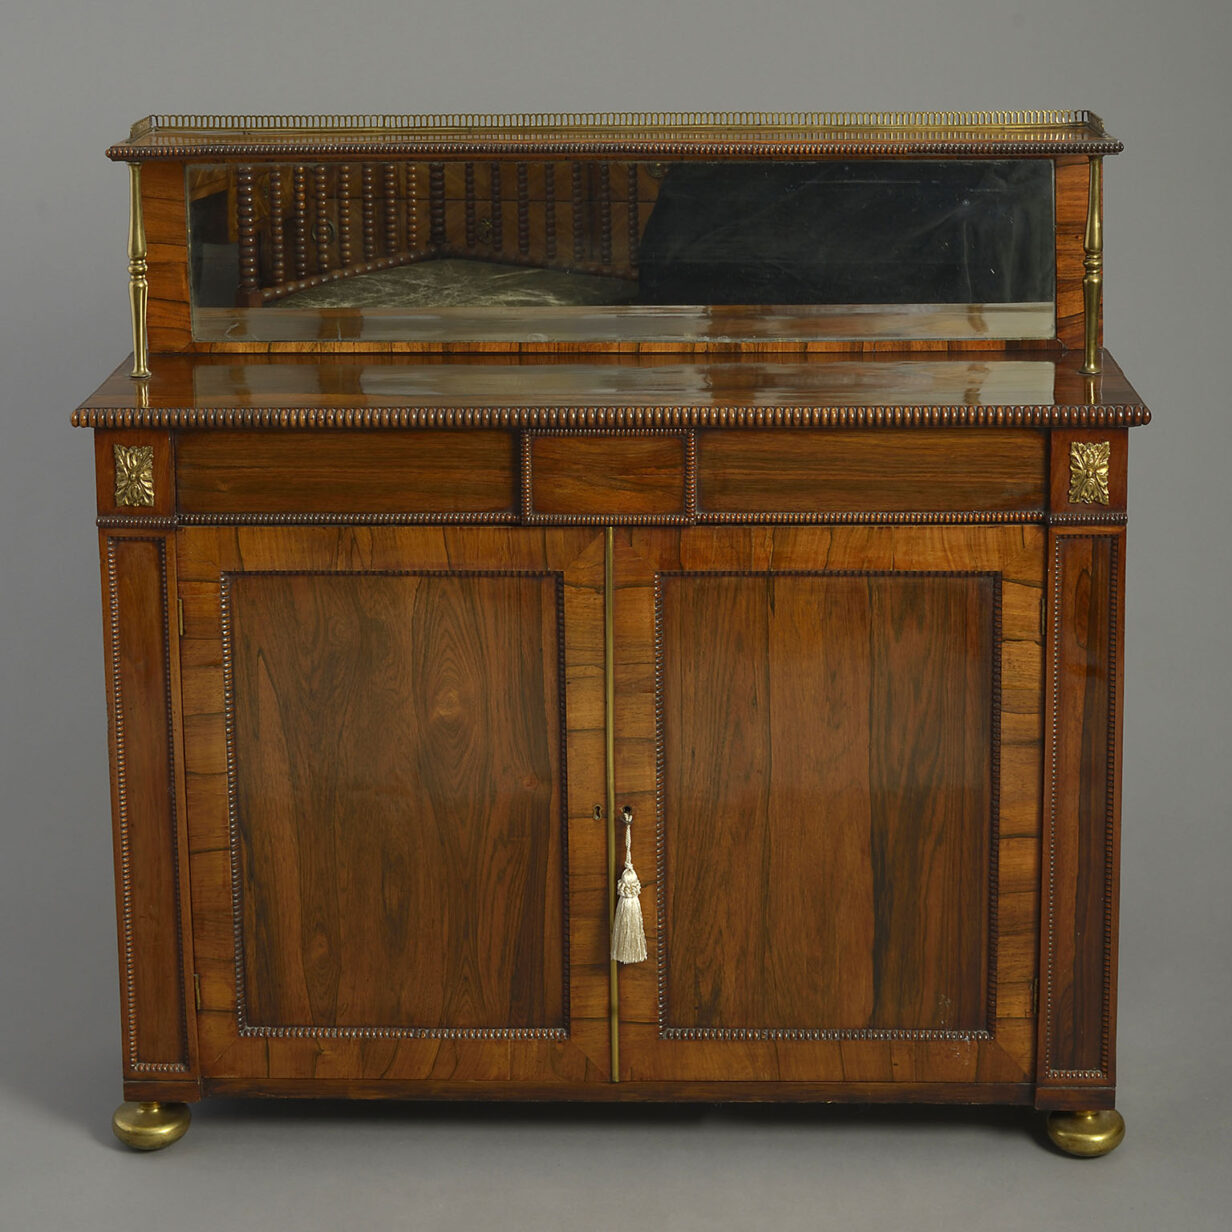 Early 19th century regency period rosewood cabinet